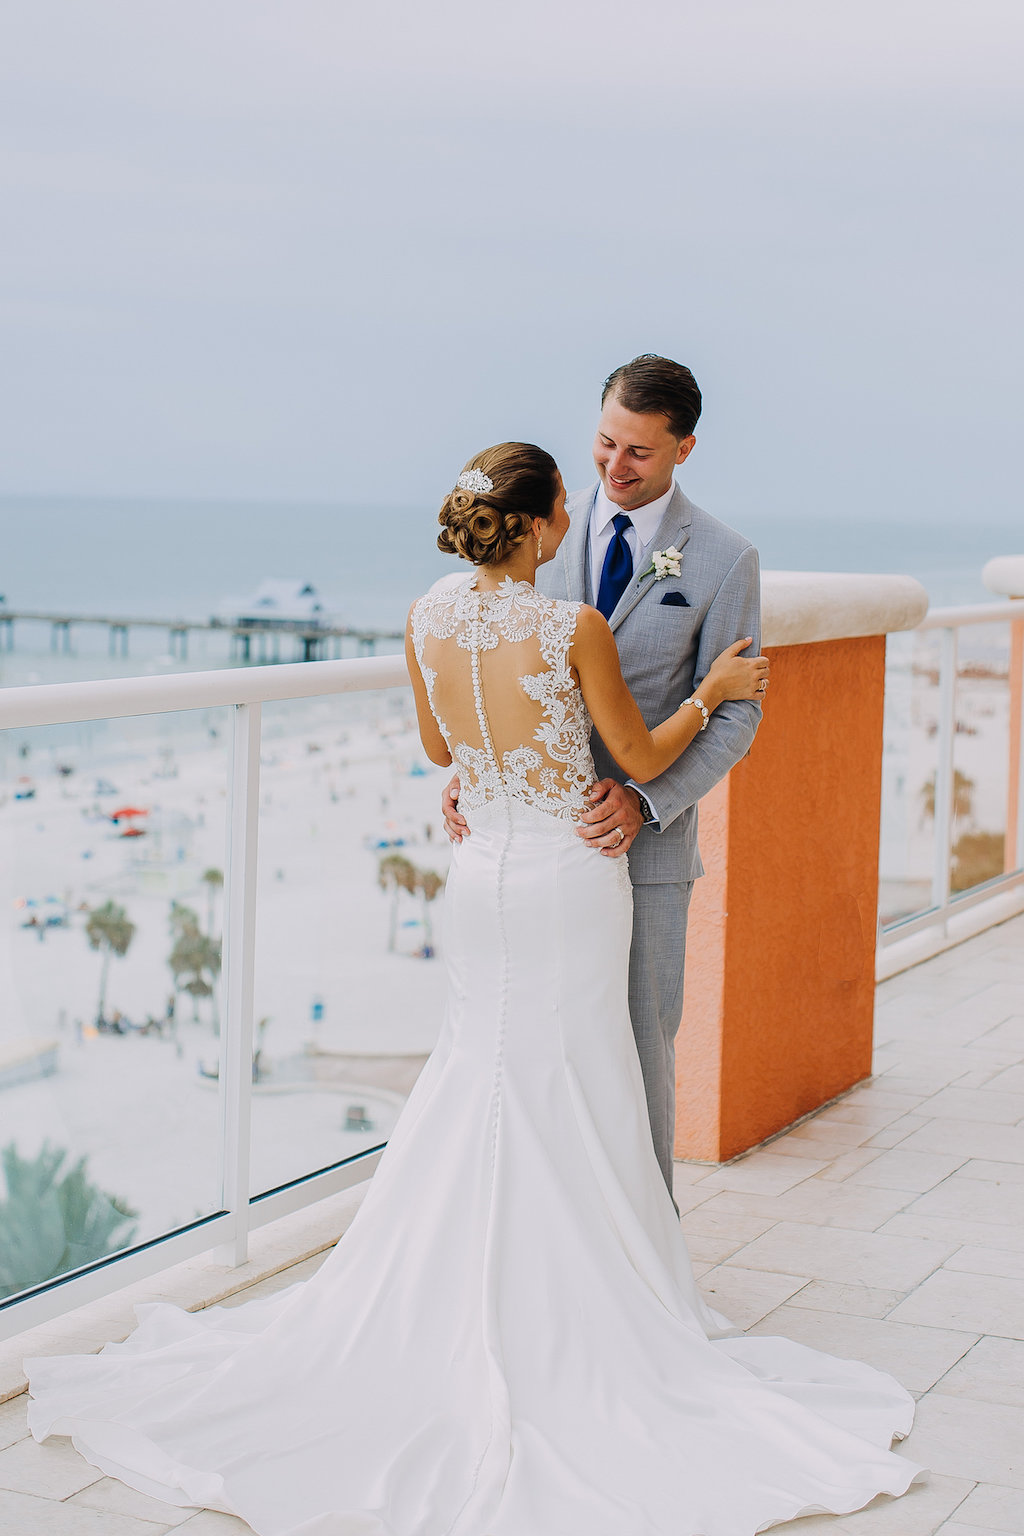 Outdoor Rooftop Bride and Groom Wedding Portrait, Bride in Lace Illusion Back Sincerity Bridal Wedding Dress, Groom in Gray Suit with Navy Blue Tie and White Floral Boutonniere | Tampa Bay Beachfront Hotel Wedding Venue Hyatt Regency Clearwater Beach | Wedding Photographer Rad Red Creative